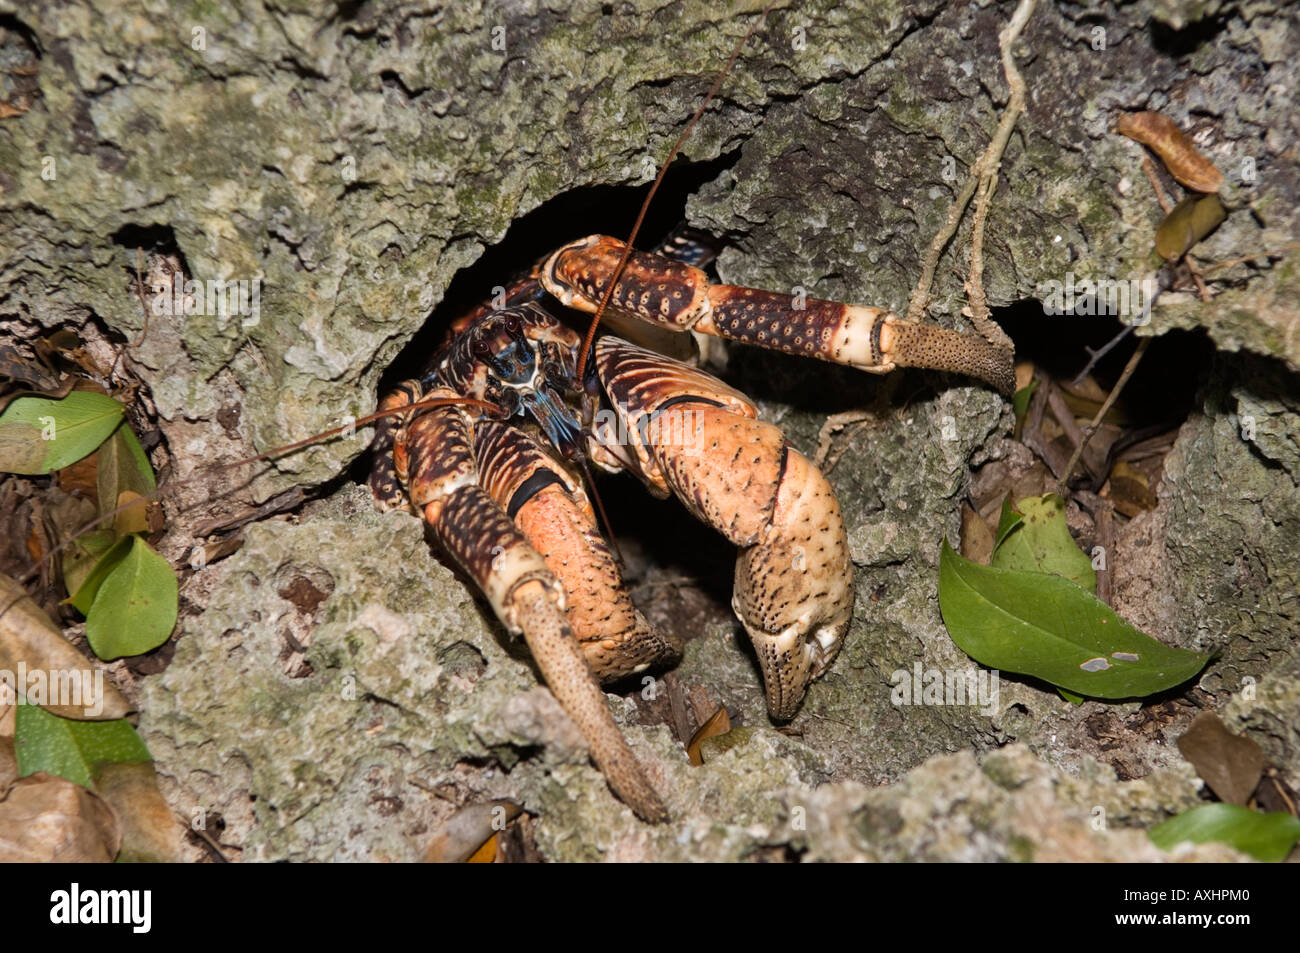 Tanzania Zanzibar Chumbe Island Giant Coconut Crab Birgus Latro coming out of  a coral hole in the forest at night Stock Photo